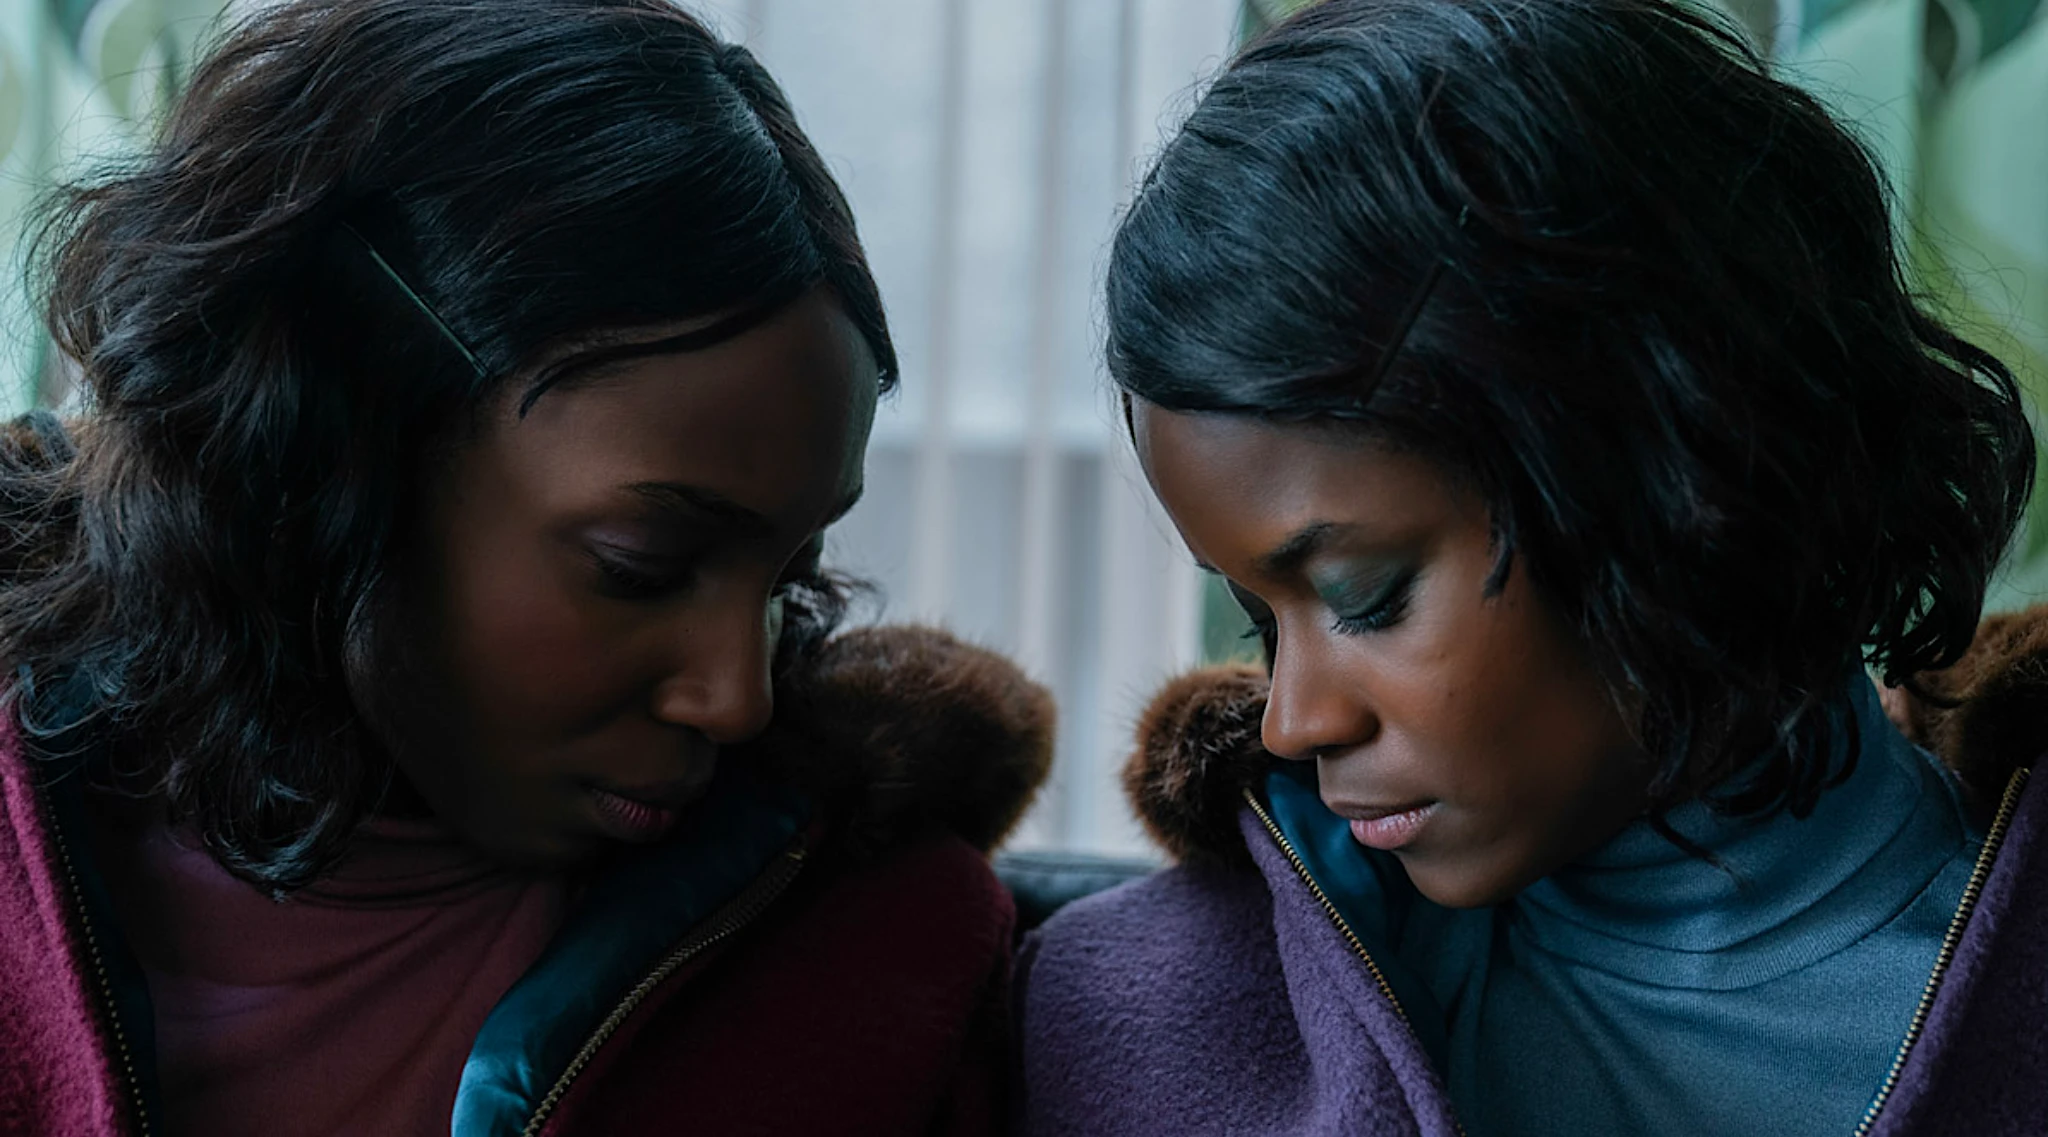 'The Silent Twins' Trailer: An Imaginative True Story Starring Letitia Wright and Tamara Lawrance